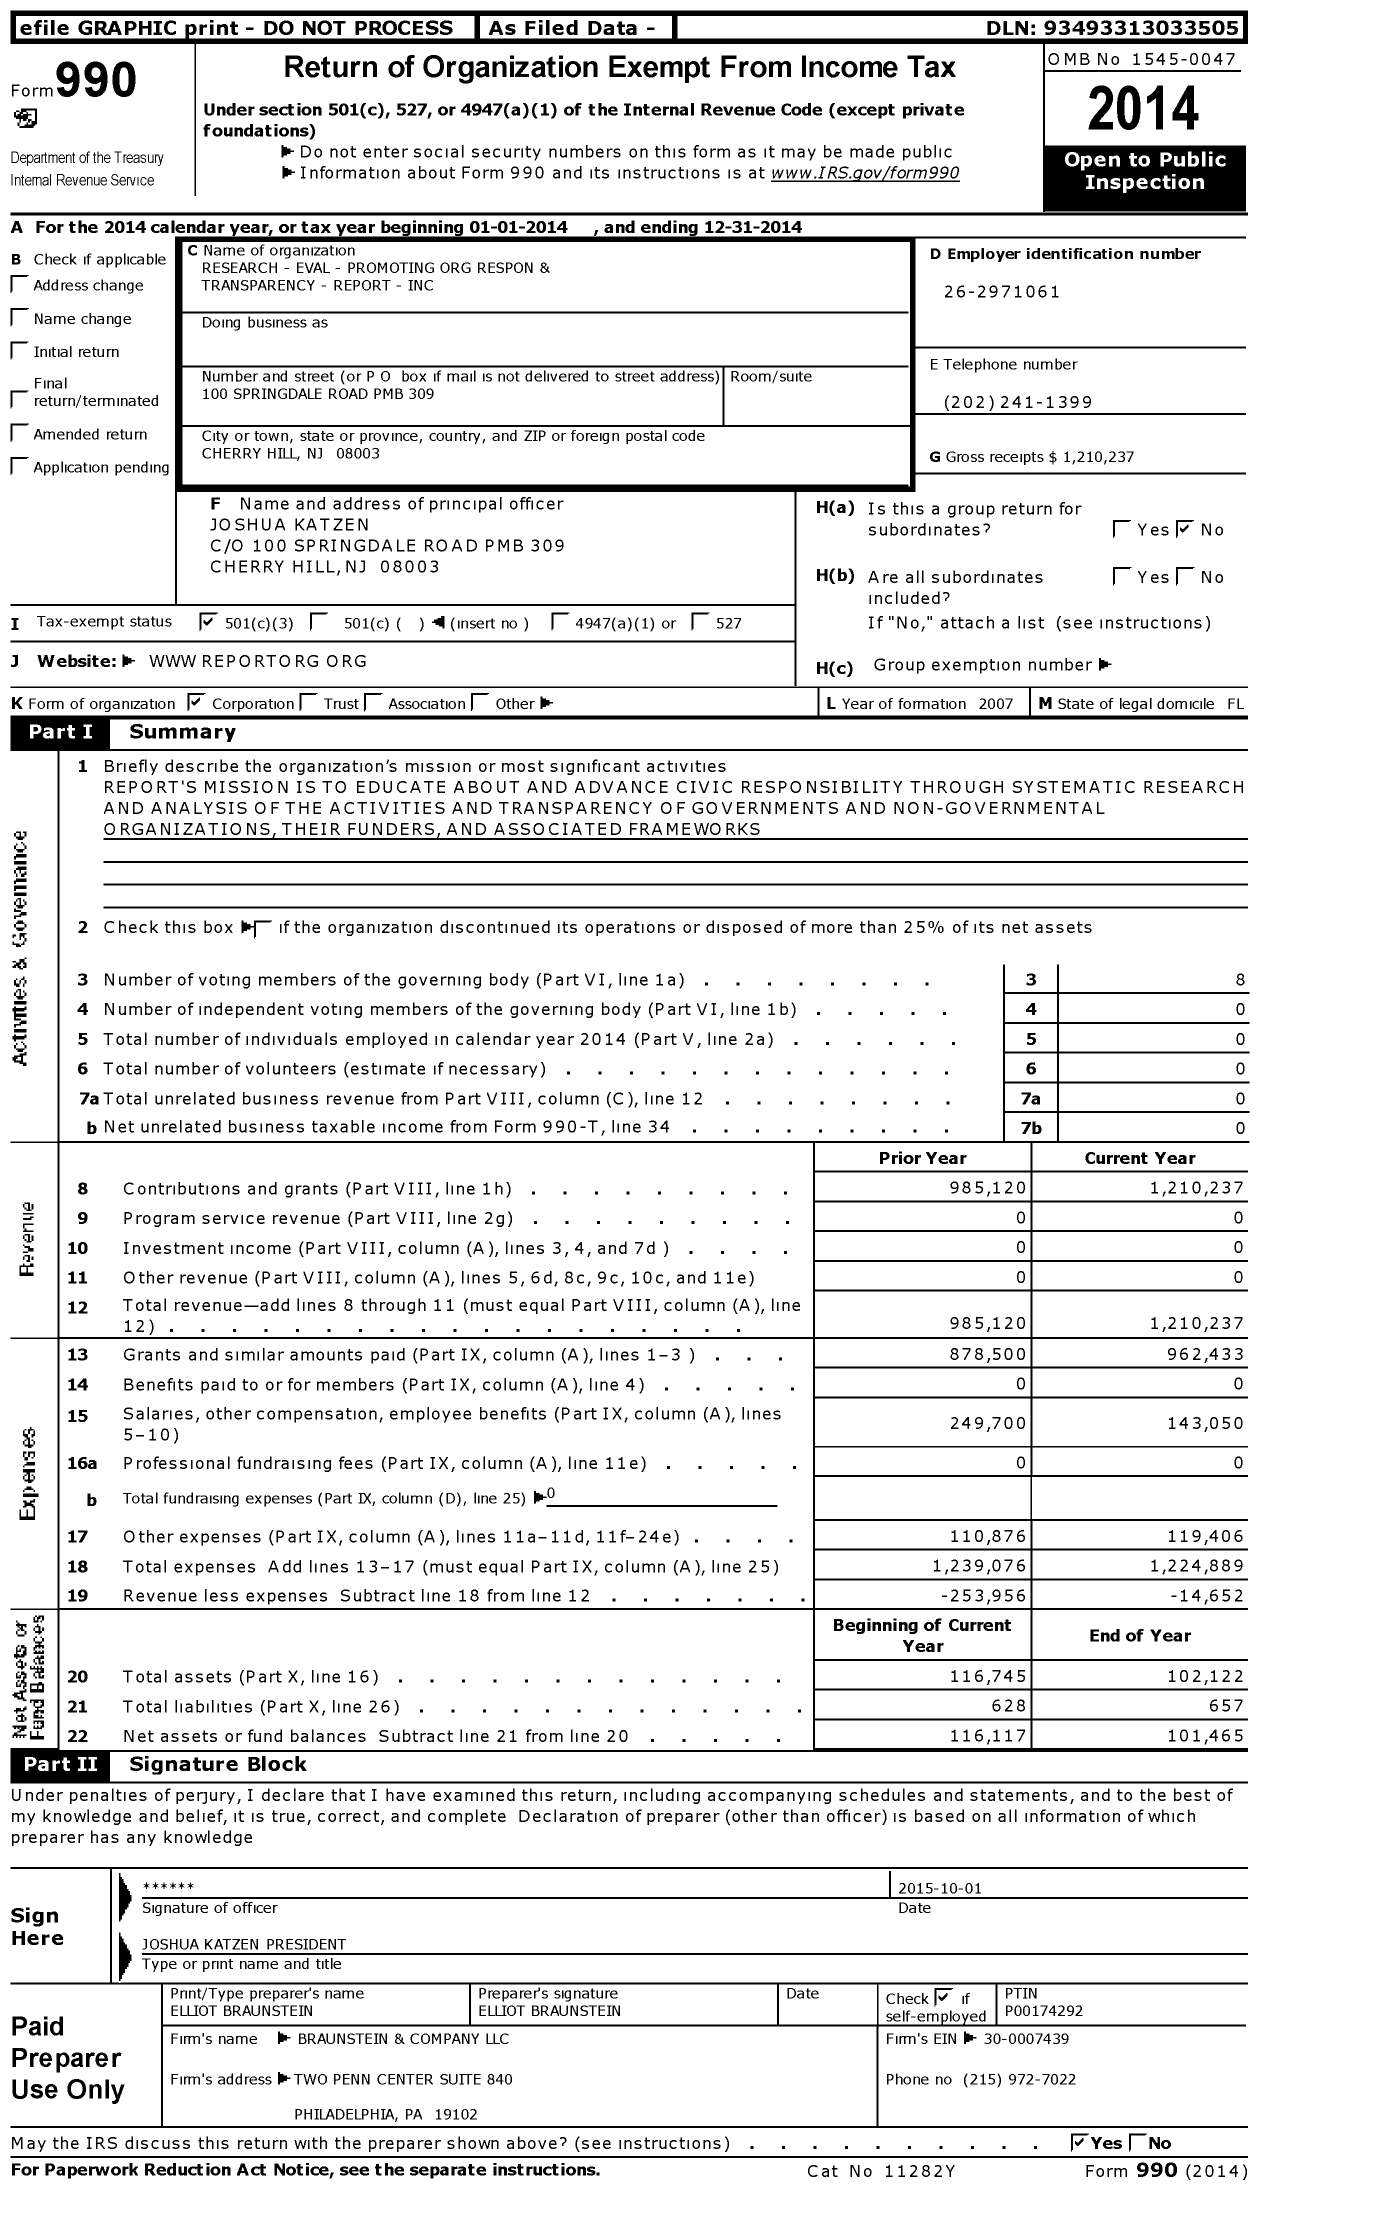 Image of first page of 2014 Form 990 for Research - Eval - Promoting Org Respon and Transparency - Report